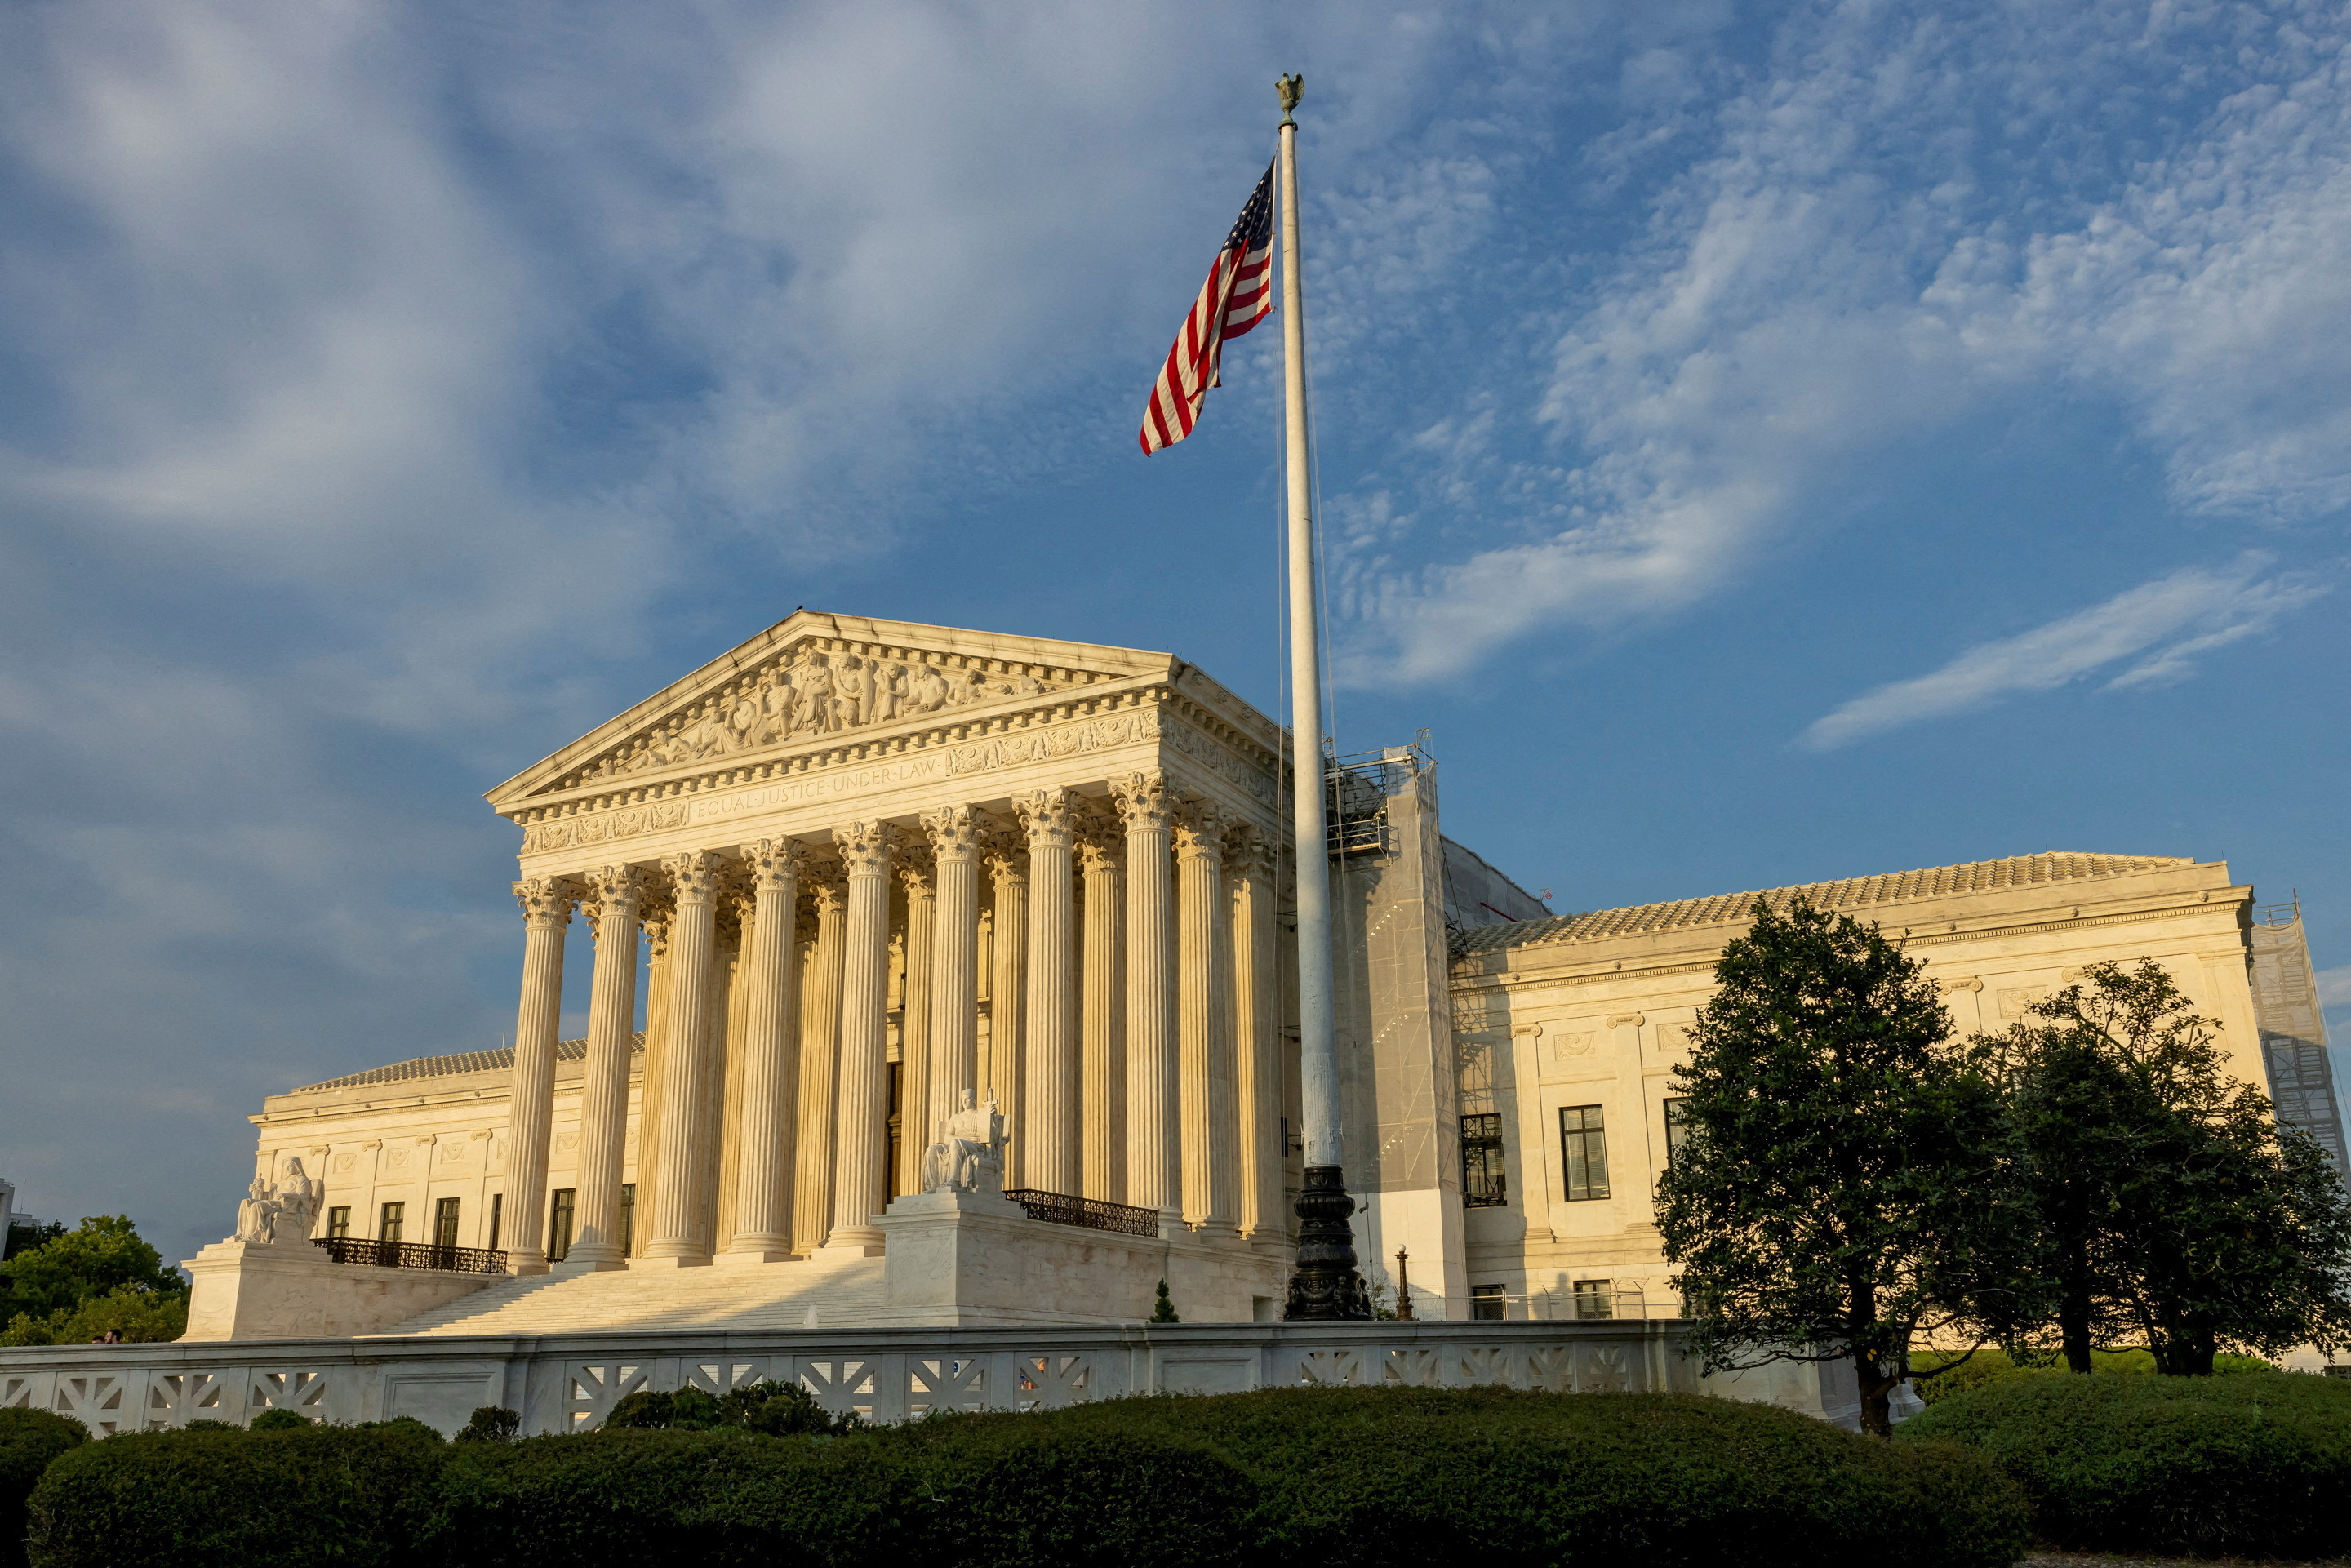 A view of the U.S. Supreme Court, in Washington